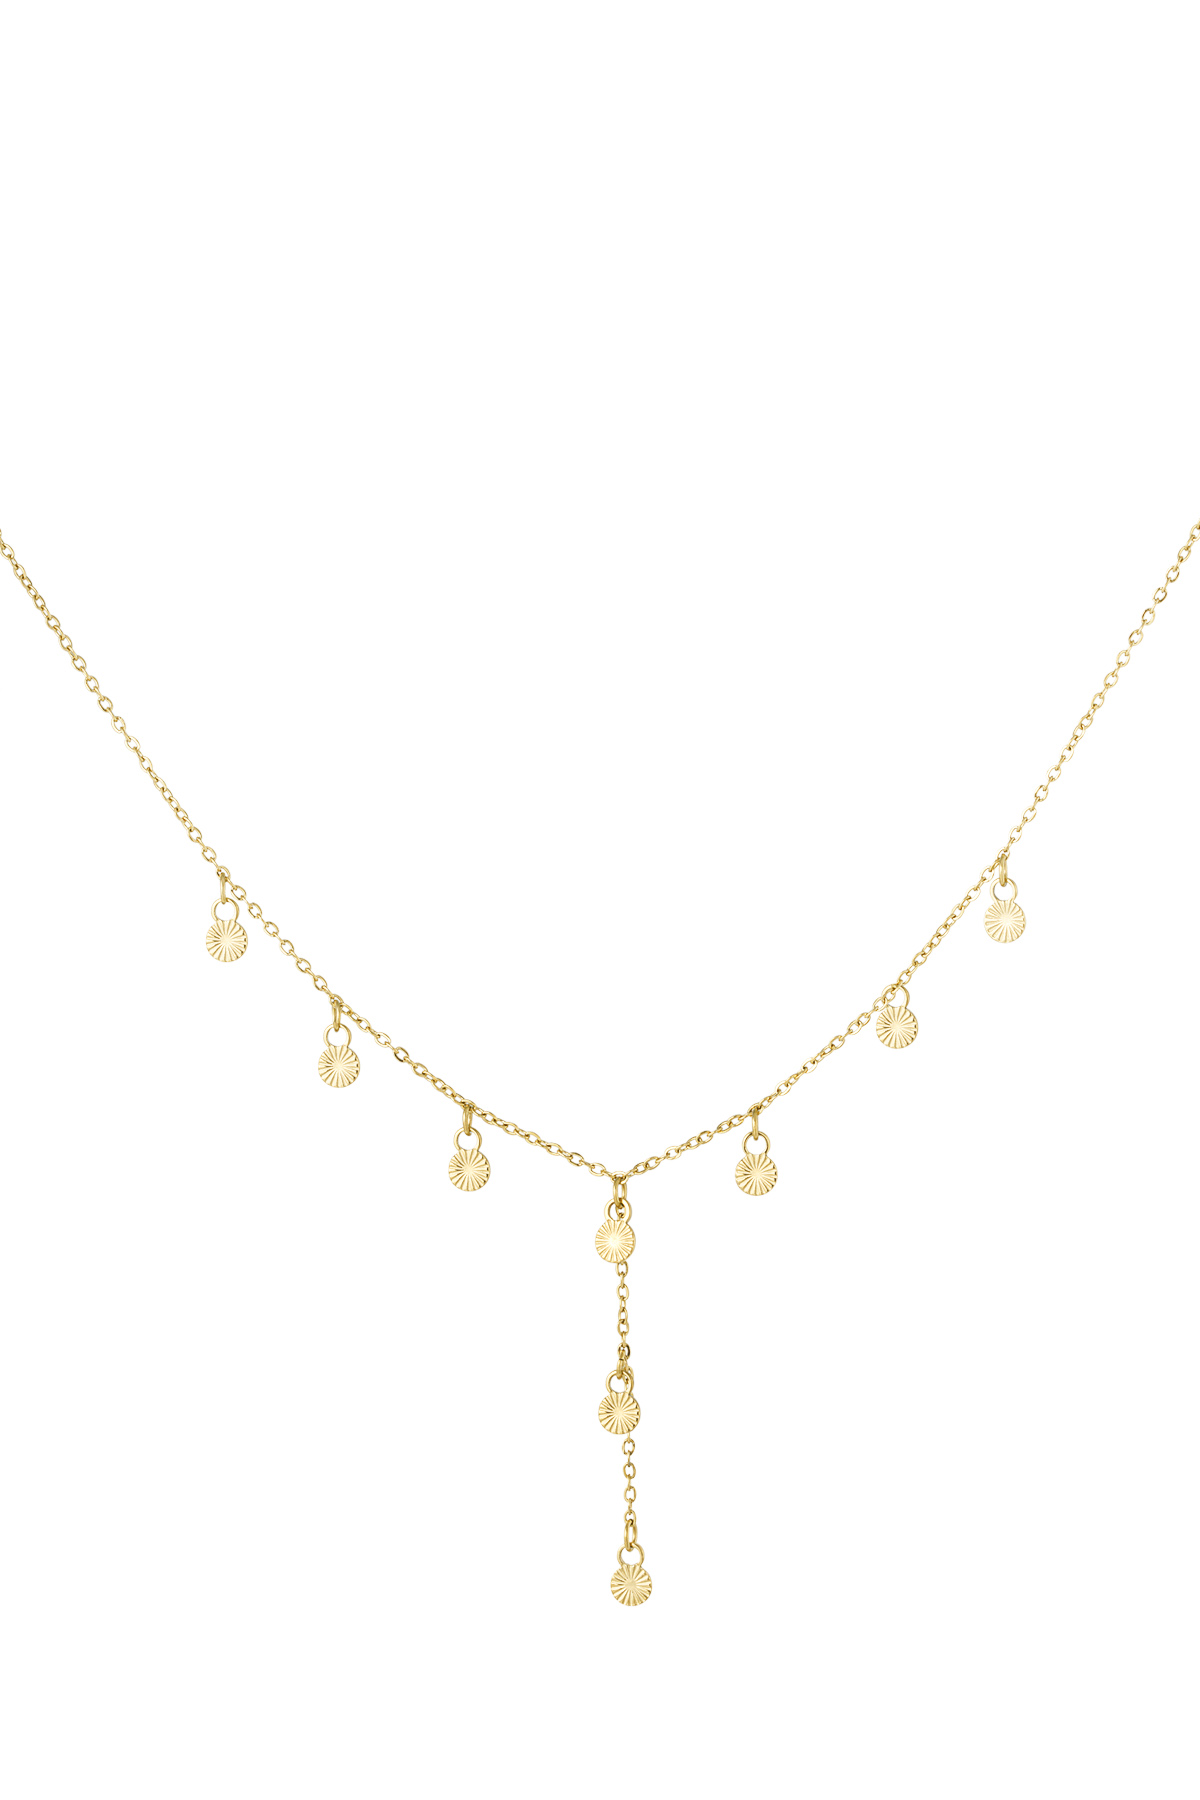 Long necklace with round charms - gold 